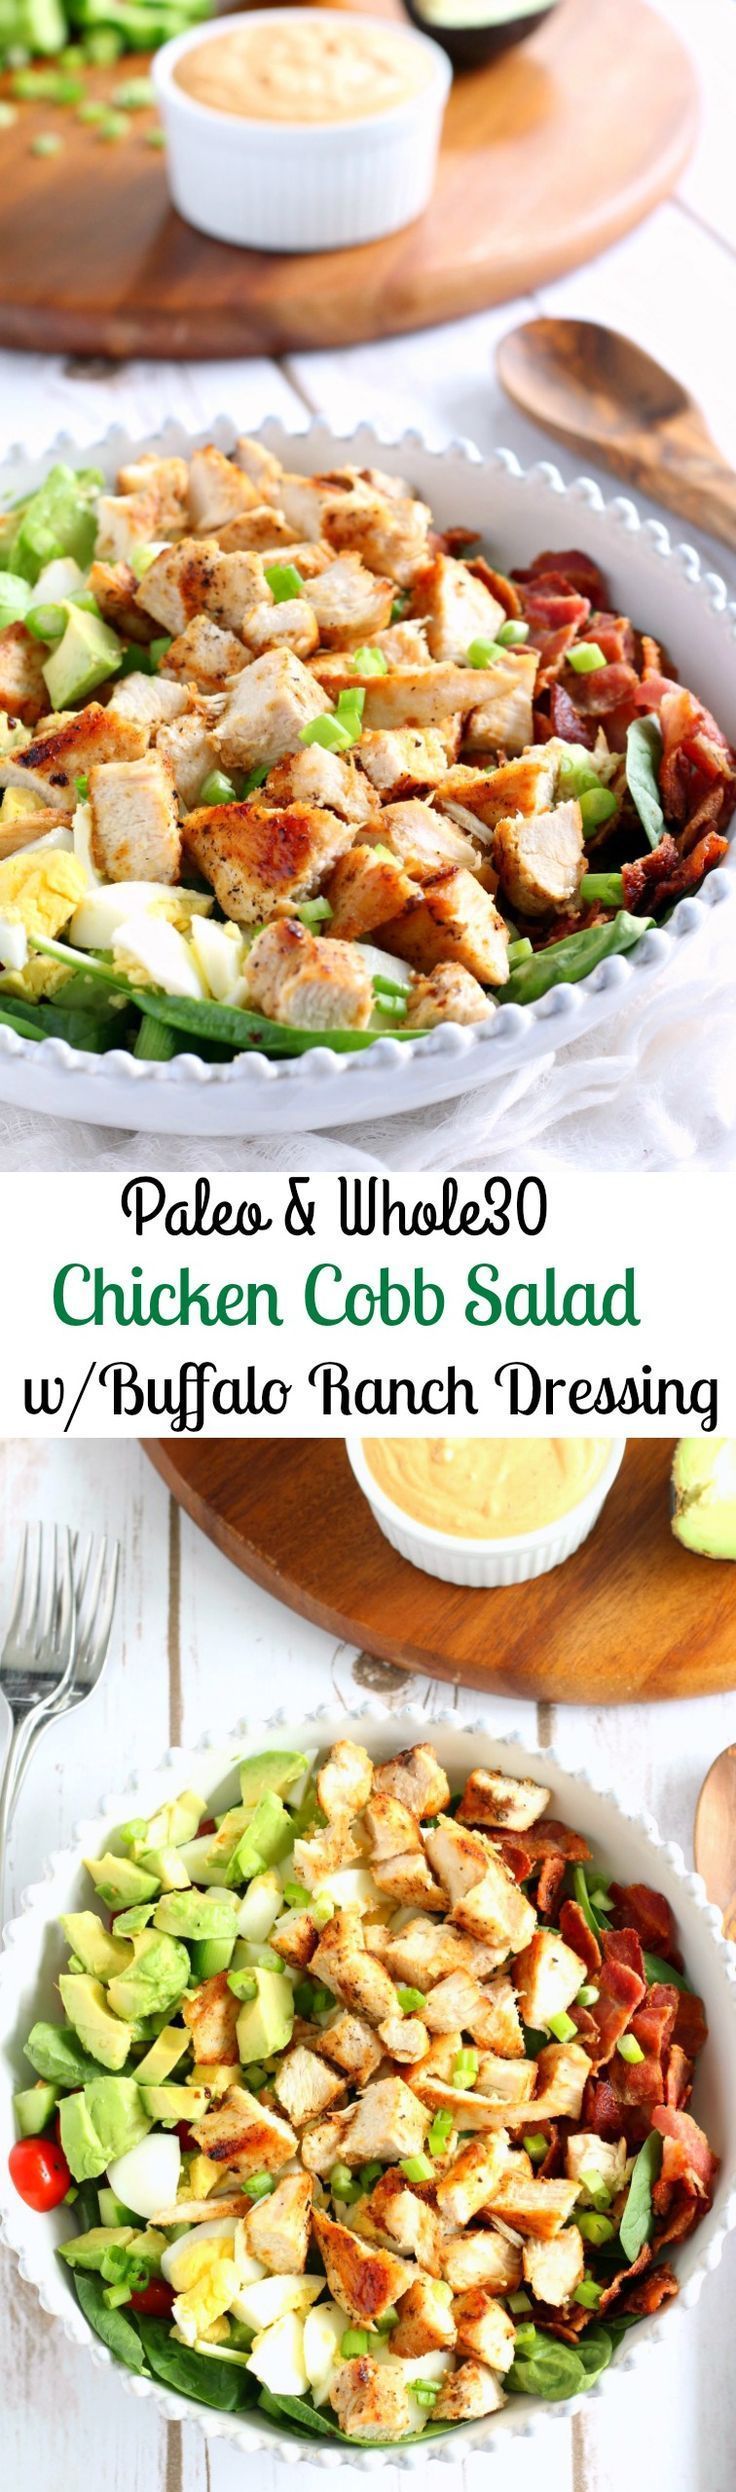 Whole 30 and paleo chicken cobb salad with buffalo ranch dressing two ways! One is